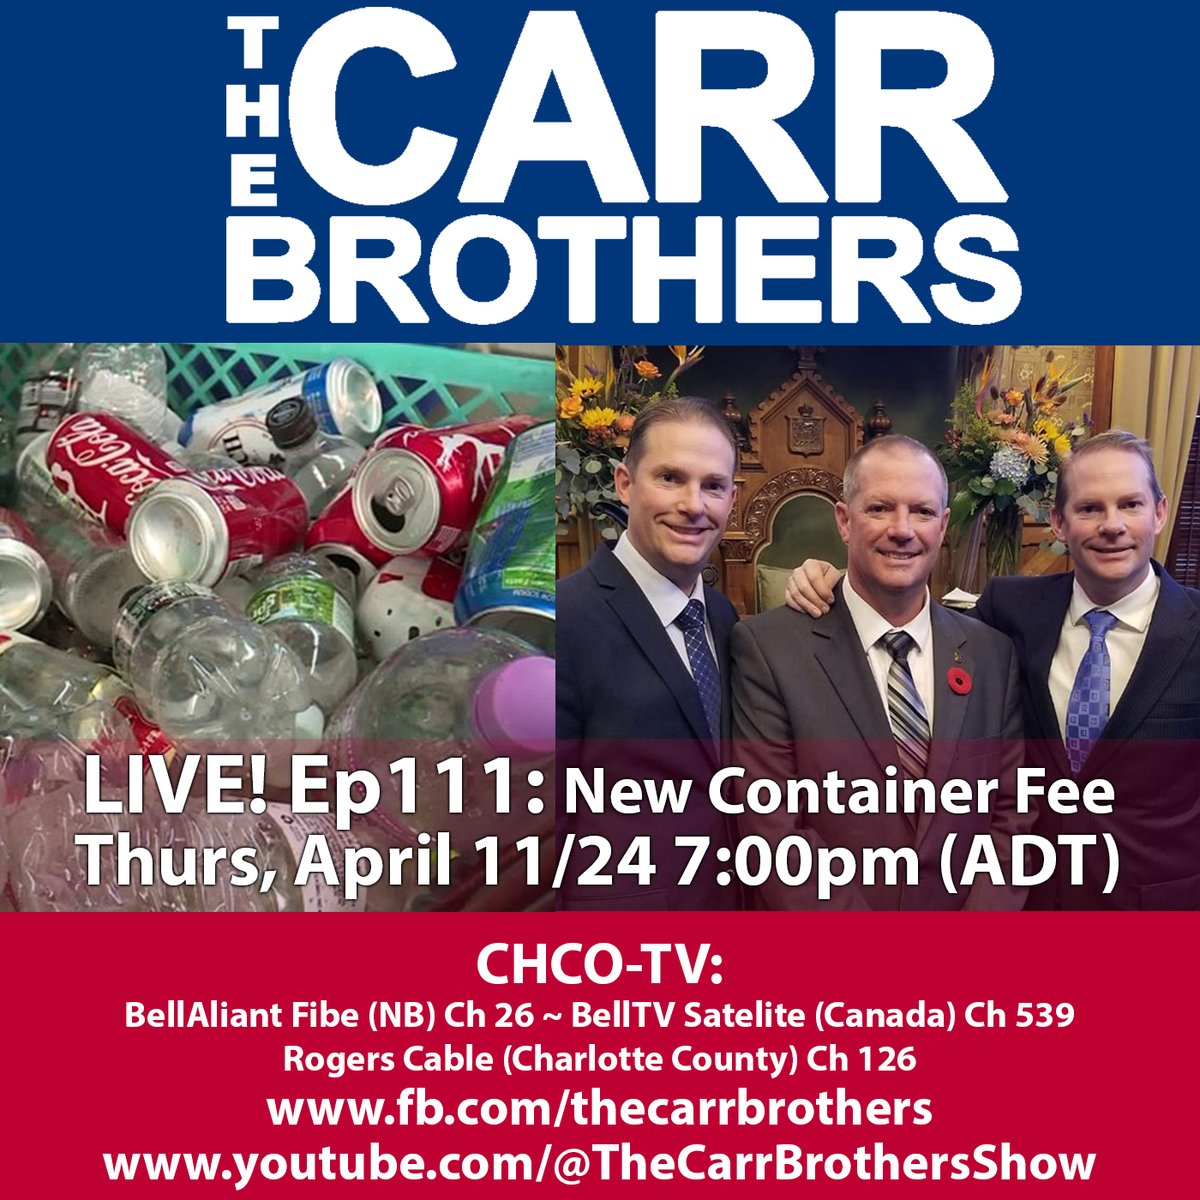 Ep111. @cbcjones had a story earlier this week. Thursday's show is about the new beverage container return system which includes a new recycling fee on all beverage containers. And, the NB Environmental Trust Fund's future is uncertain. @jeffcarr4nms @chcotv @jodyRcarr